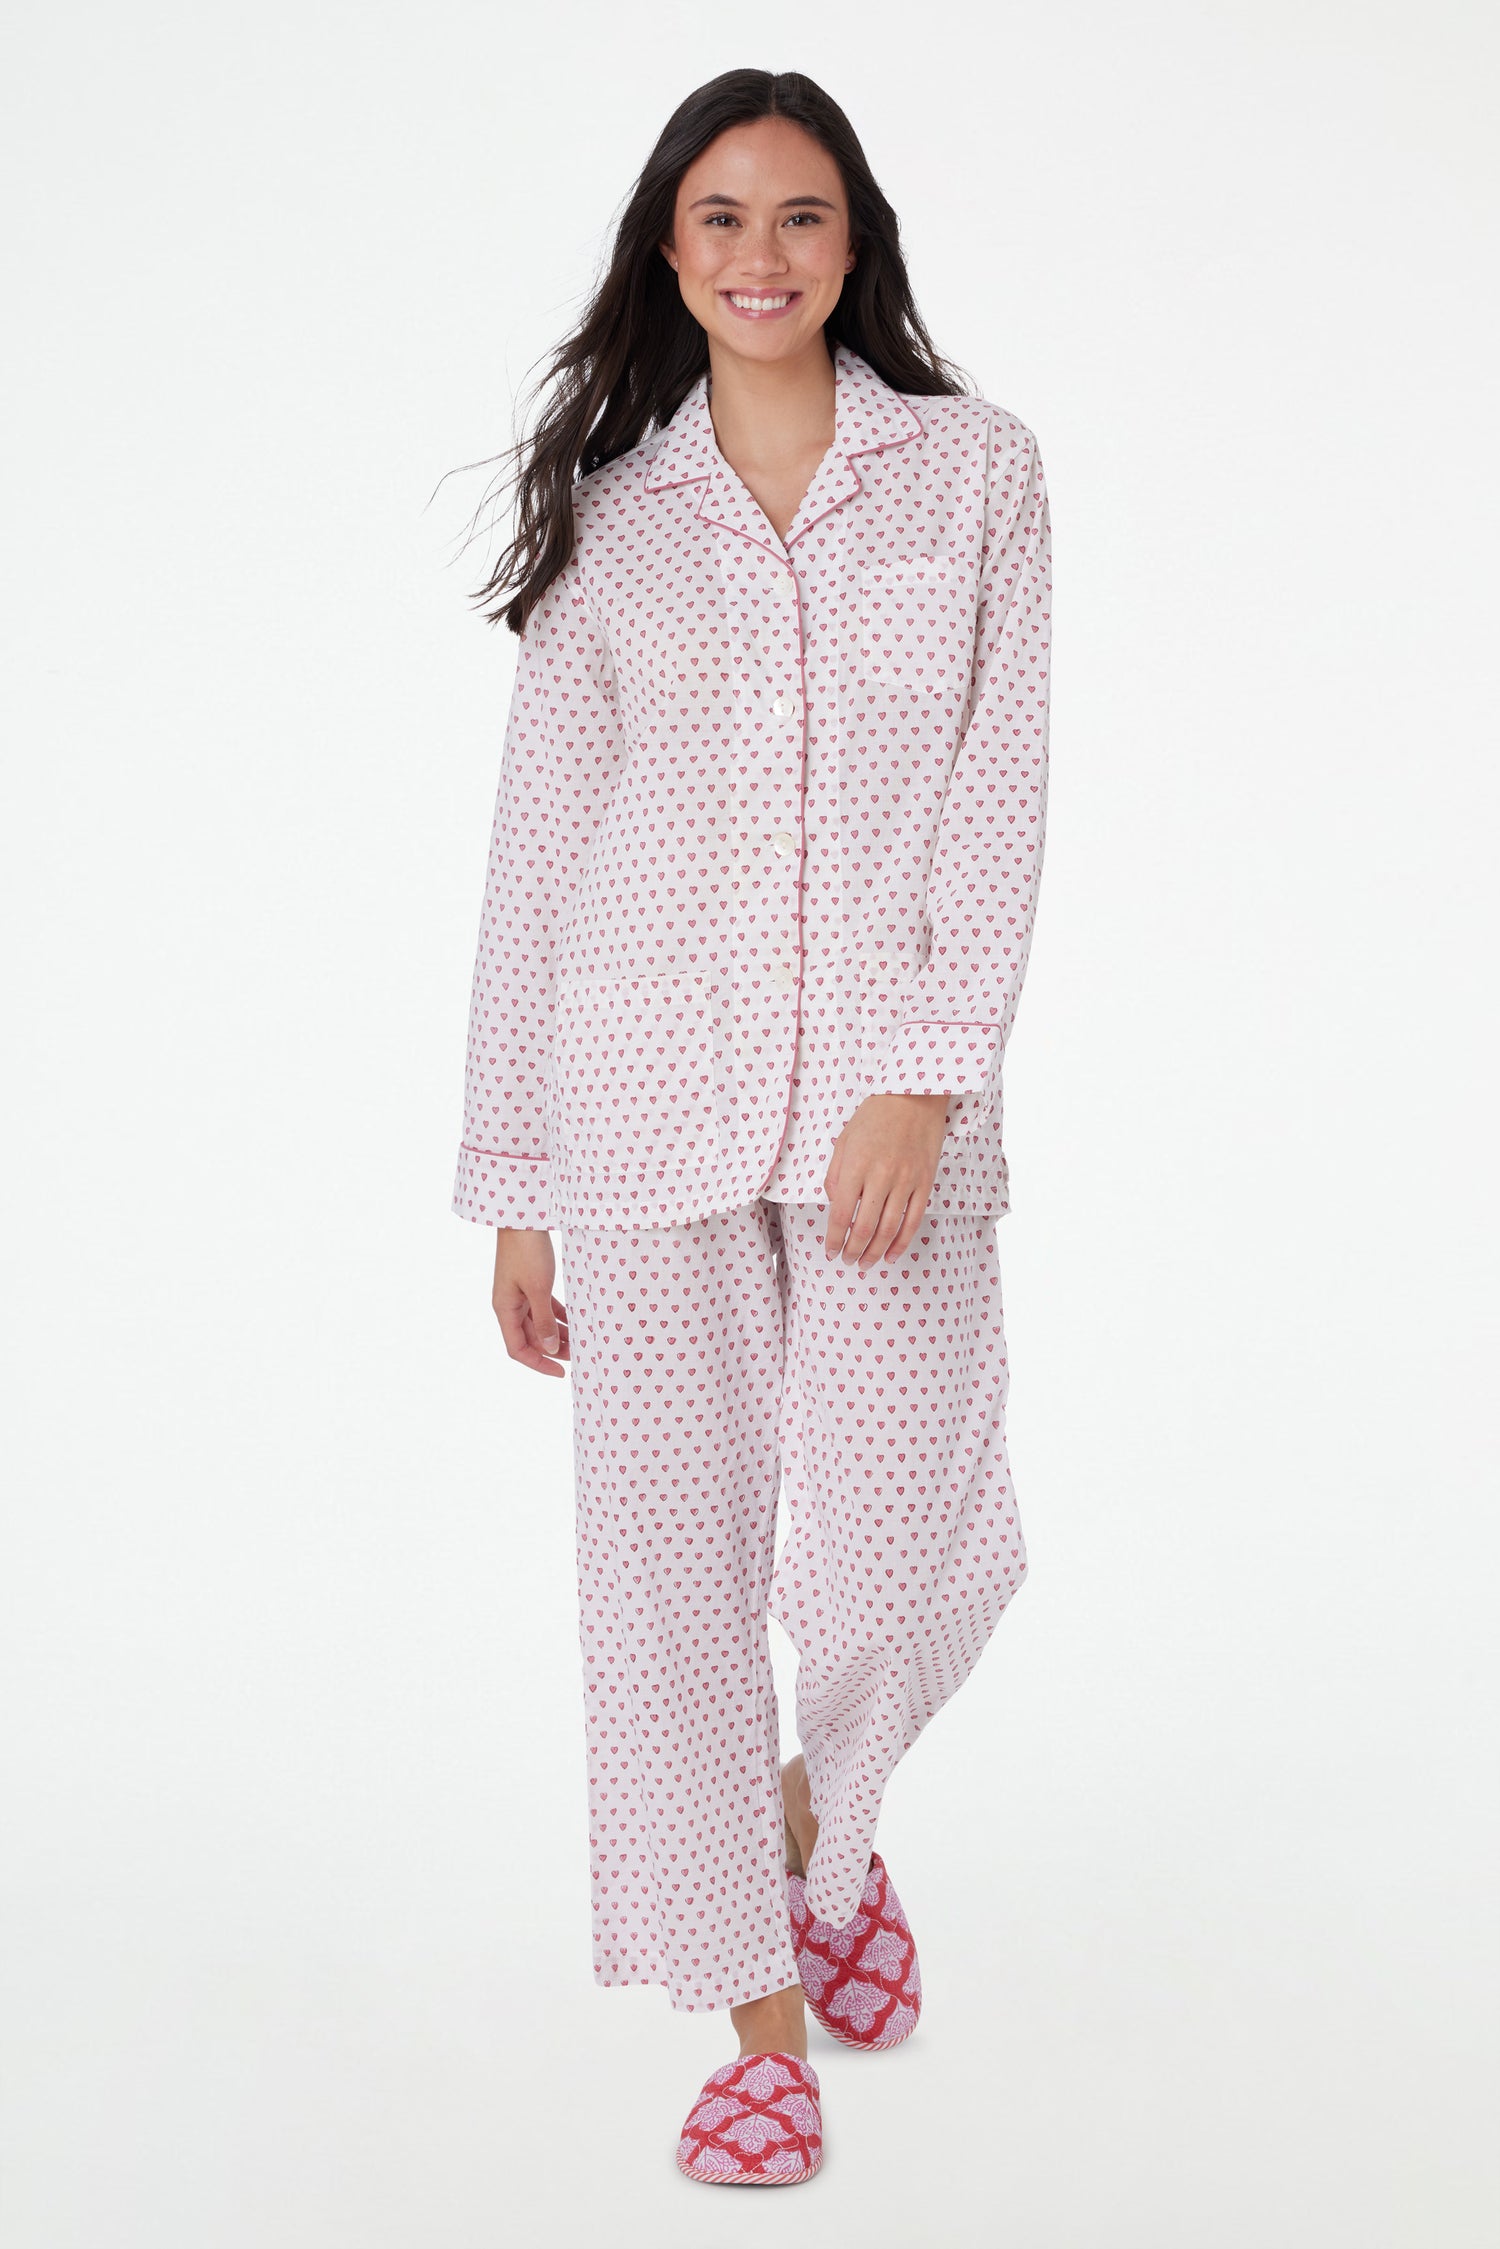 For the Friend that Lives in Loungewear